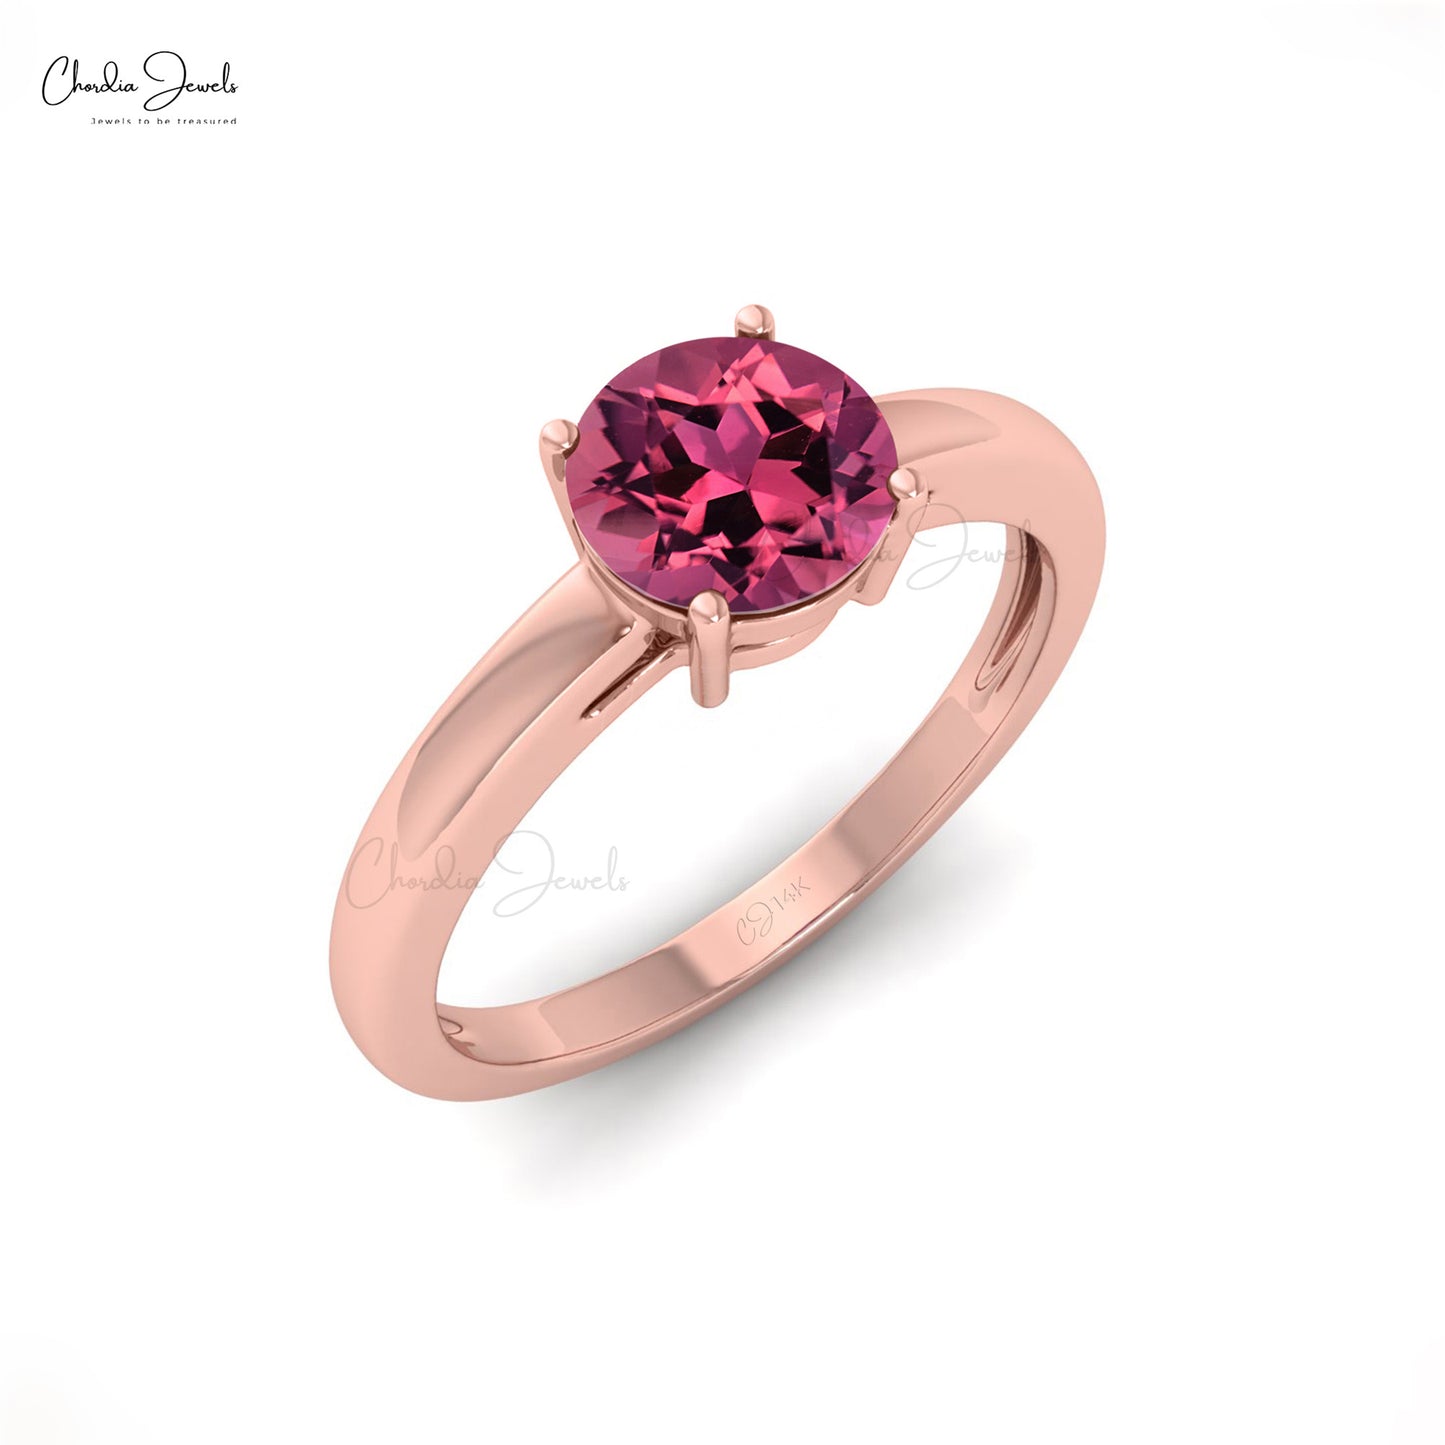 Load image into Gallery viewer, 6mm Round Cut Natural Pink Tourmaline Solitaire Ring For Women, 14k Solid Gold Gemstone Ring For Anniversary Gift
